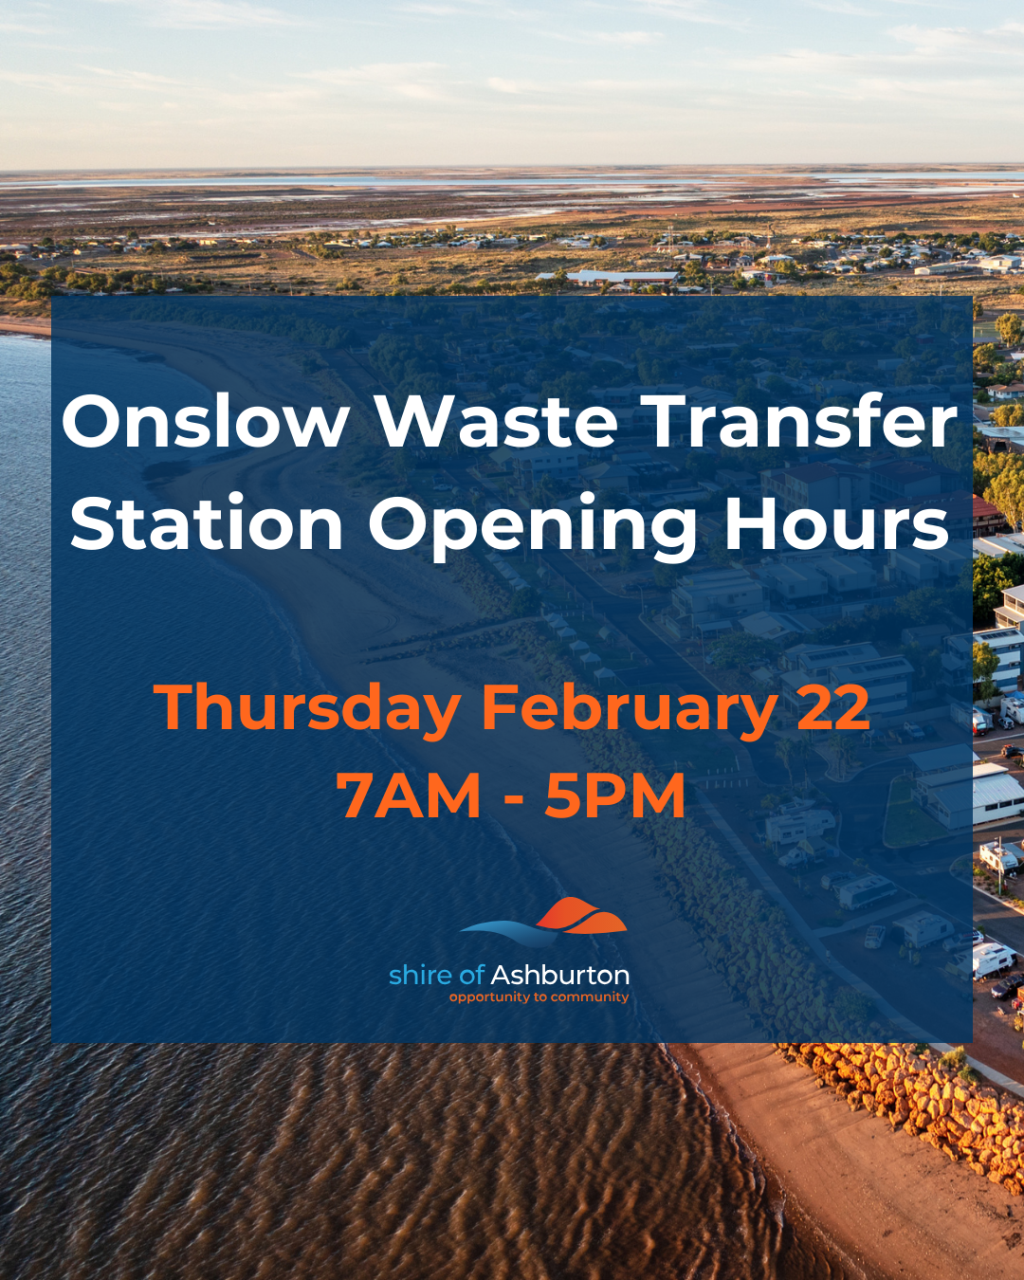 Onslow Waste Transfer Site Opening Hours Extended